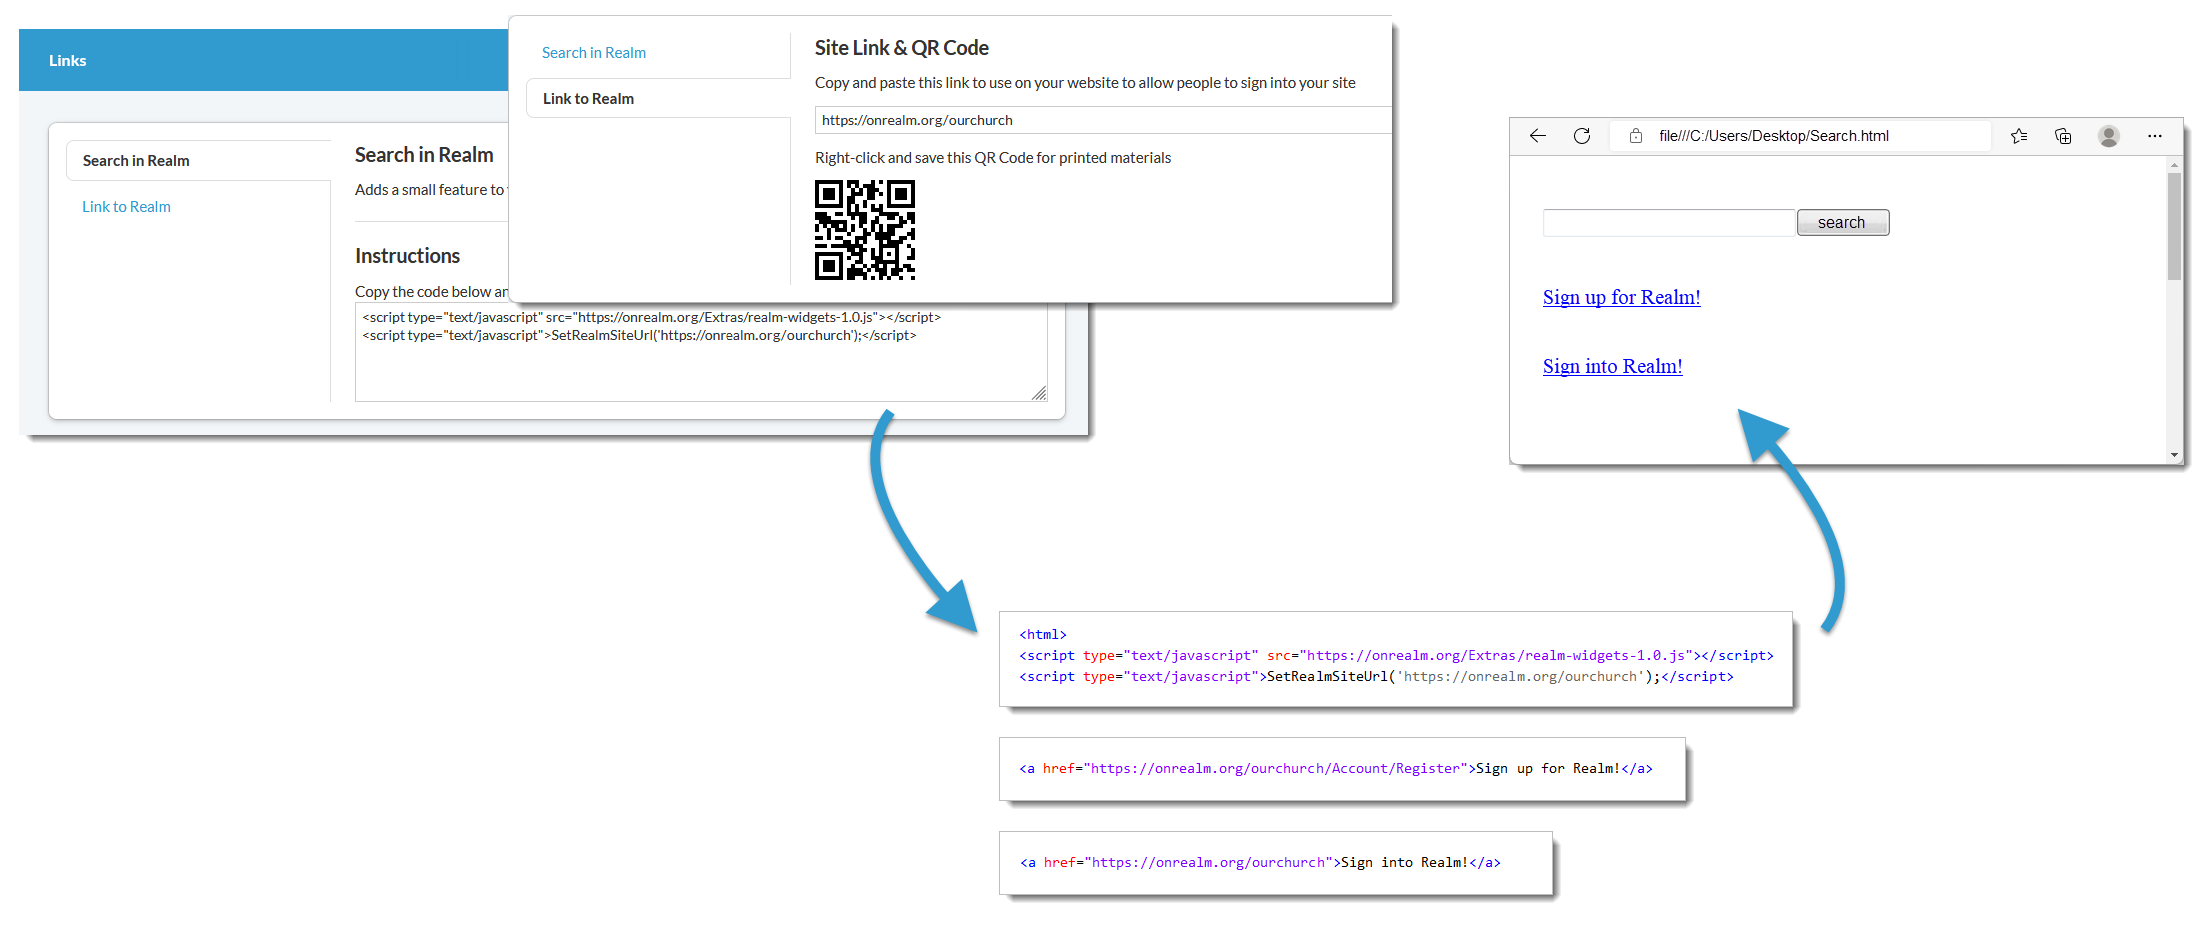 Process for adding links. 1: Copy the code for search box or links from Realm. 2: Paste code into the appropriate file used by your other website. 3: Publish.